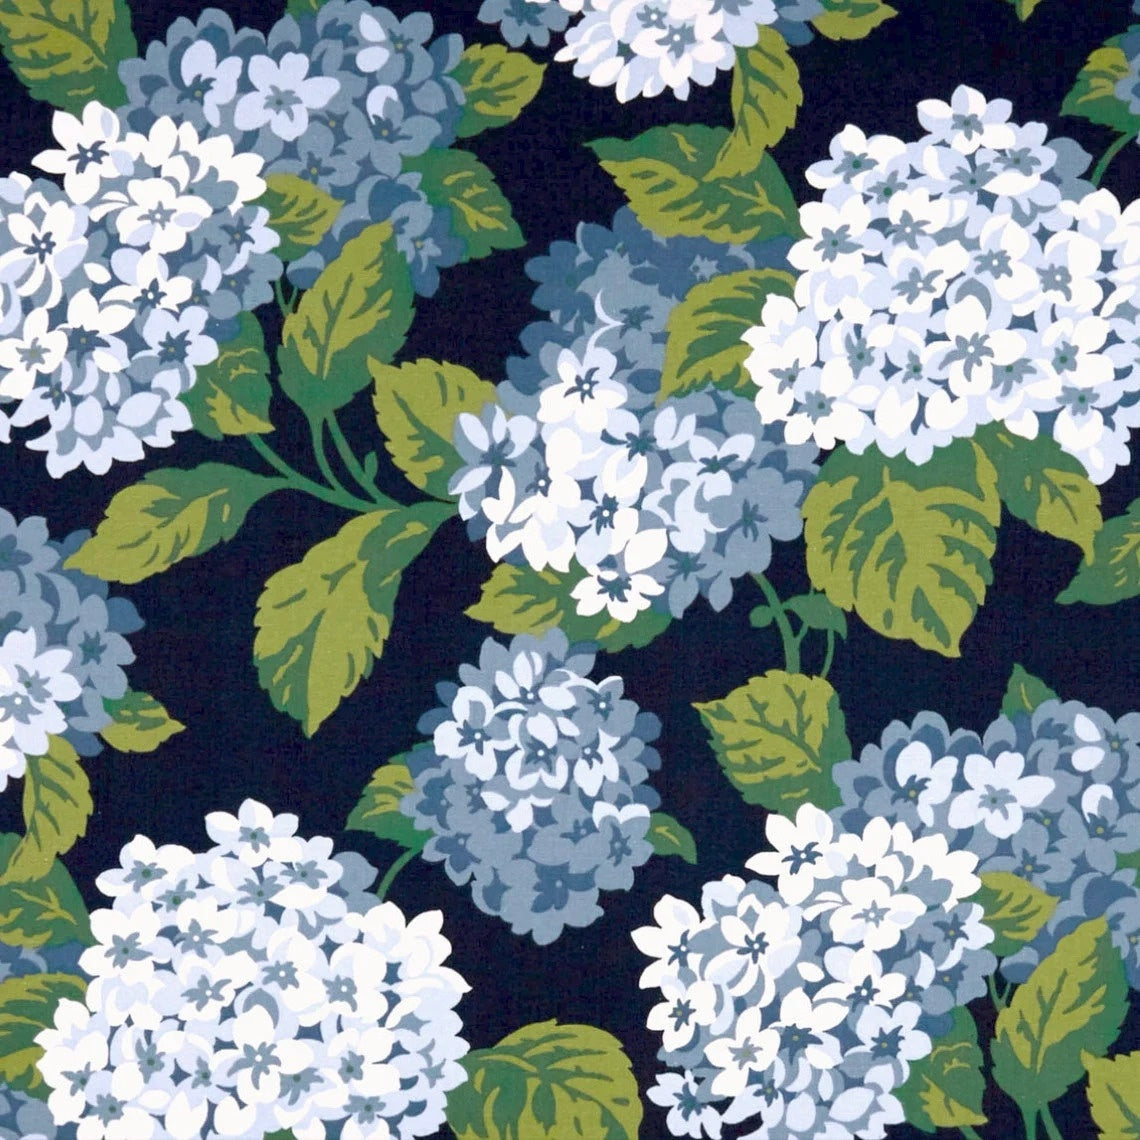 tailored bedskirt in summerwind navy blue hydrangea floral, large scale